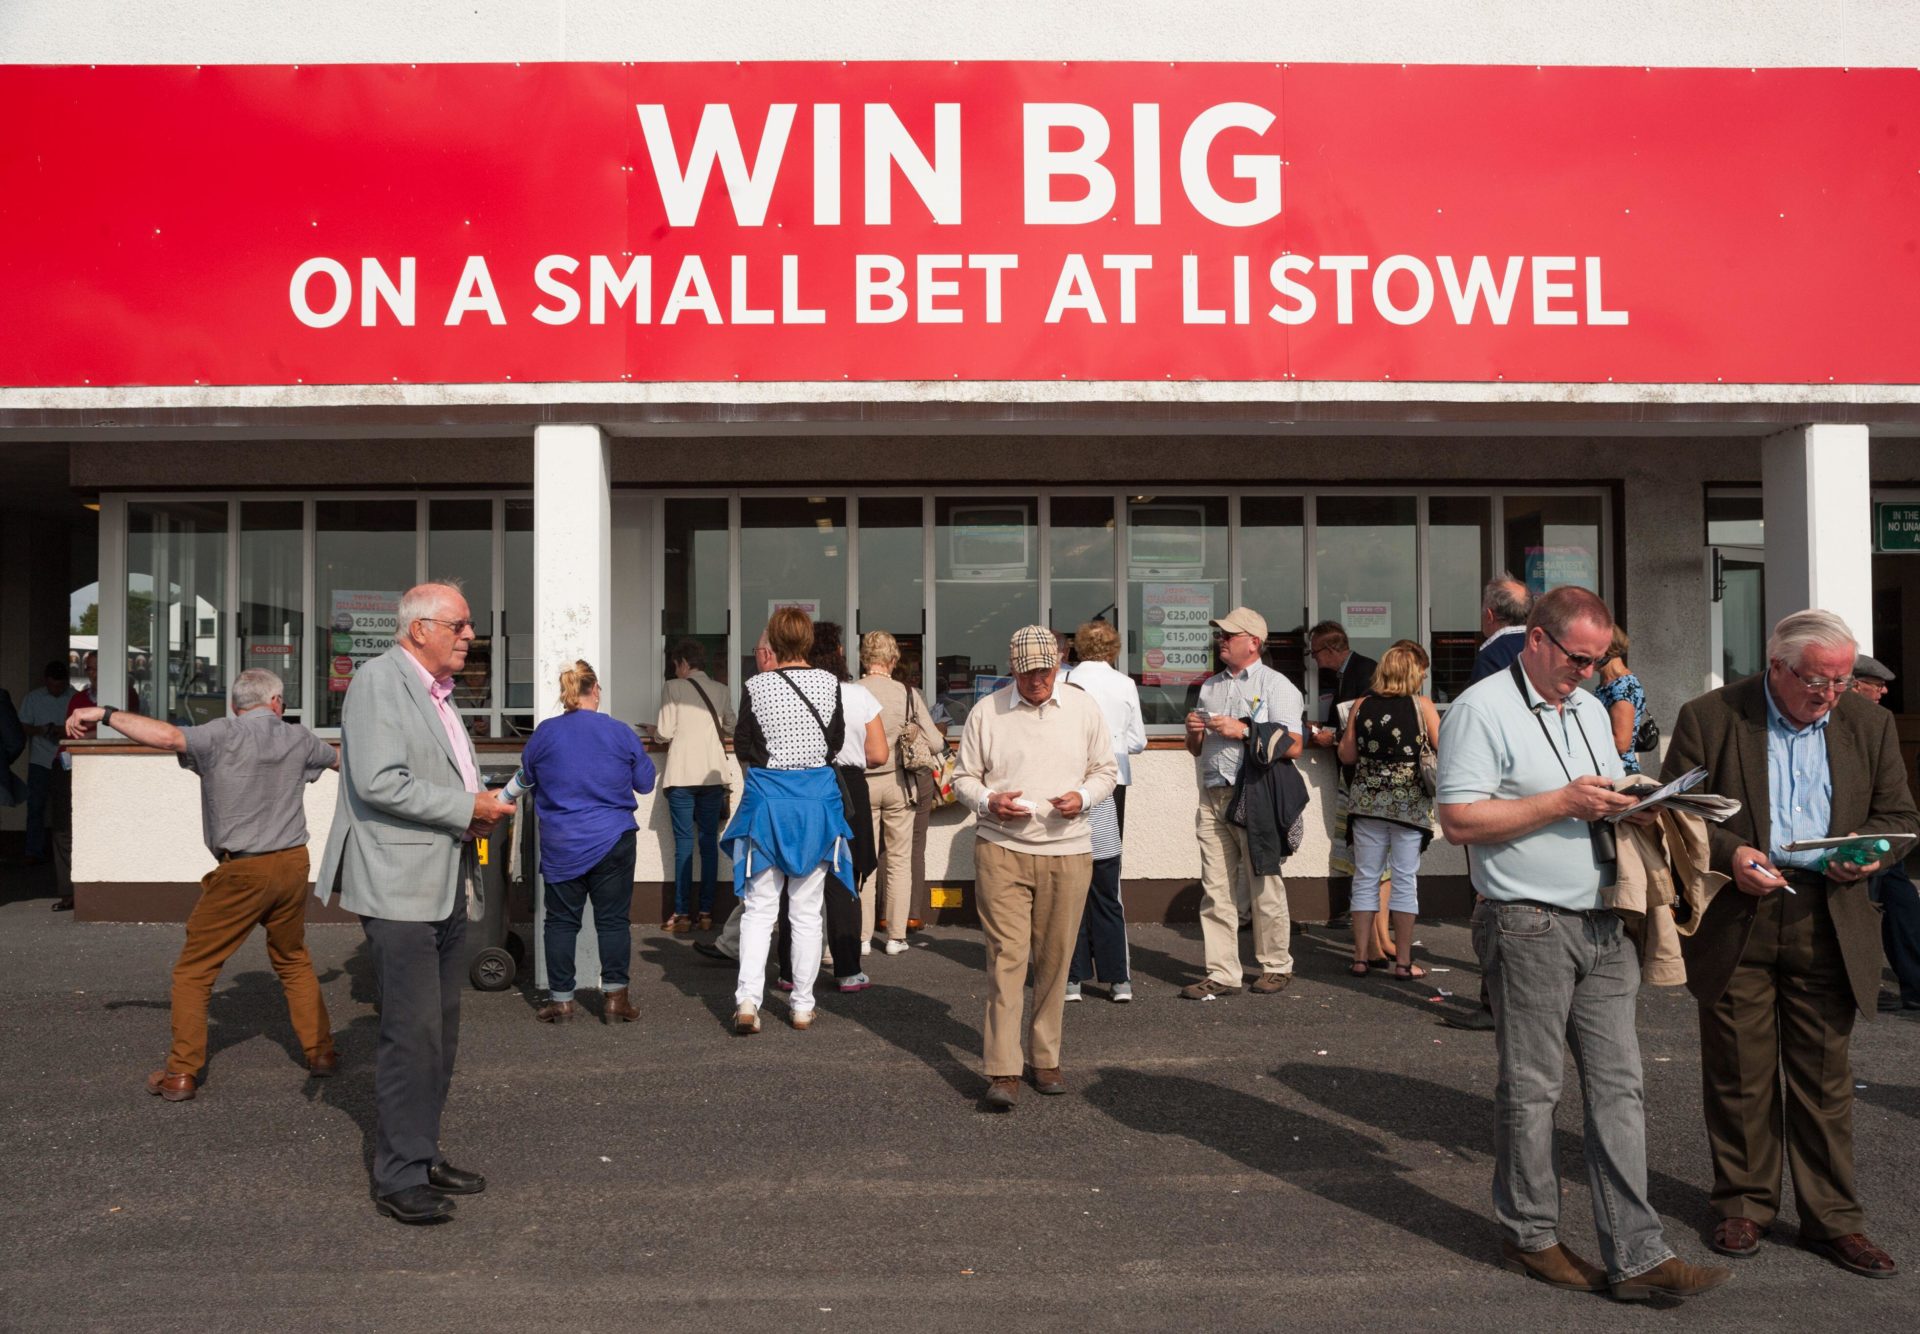 Placing bets on Listowel race track